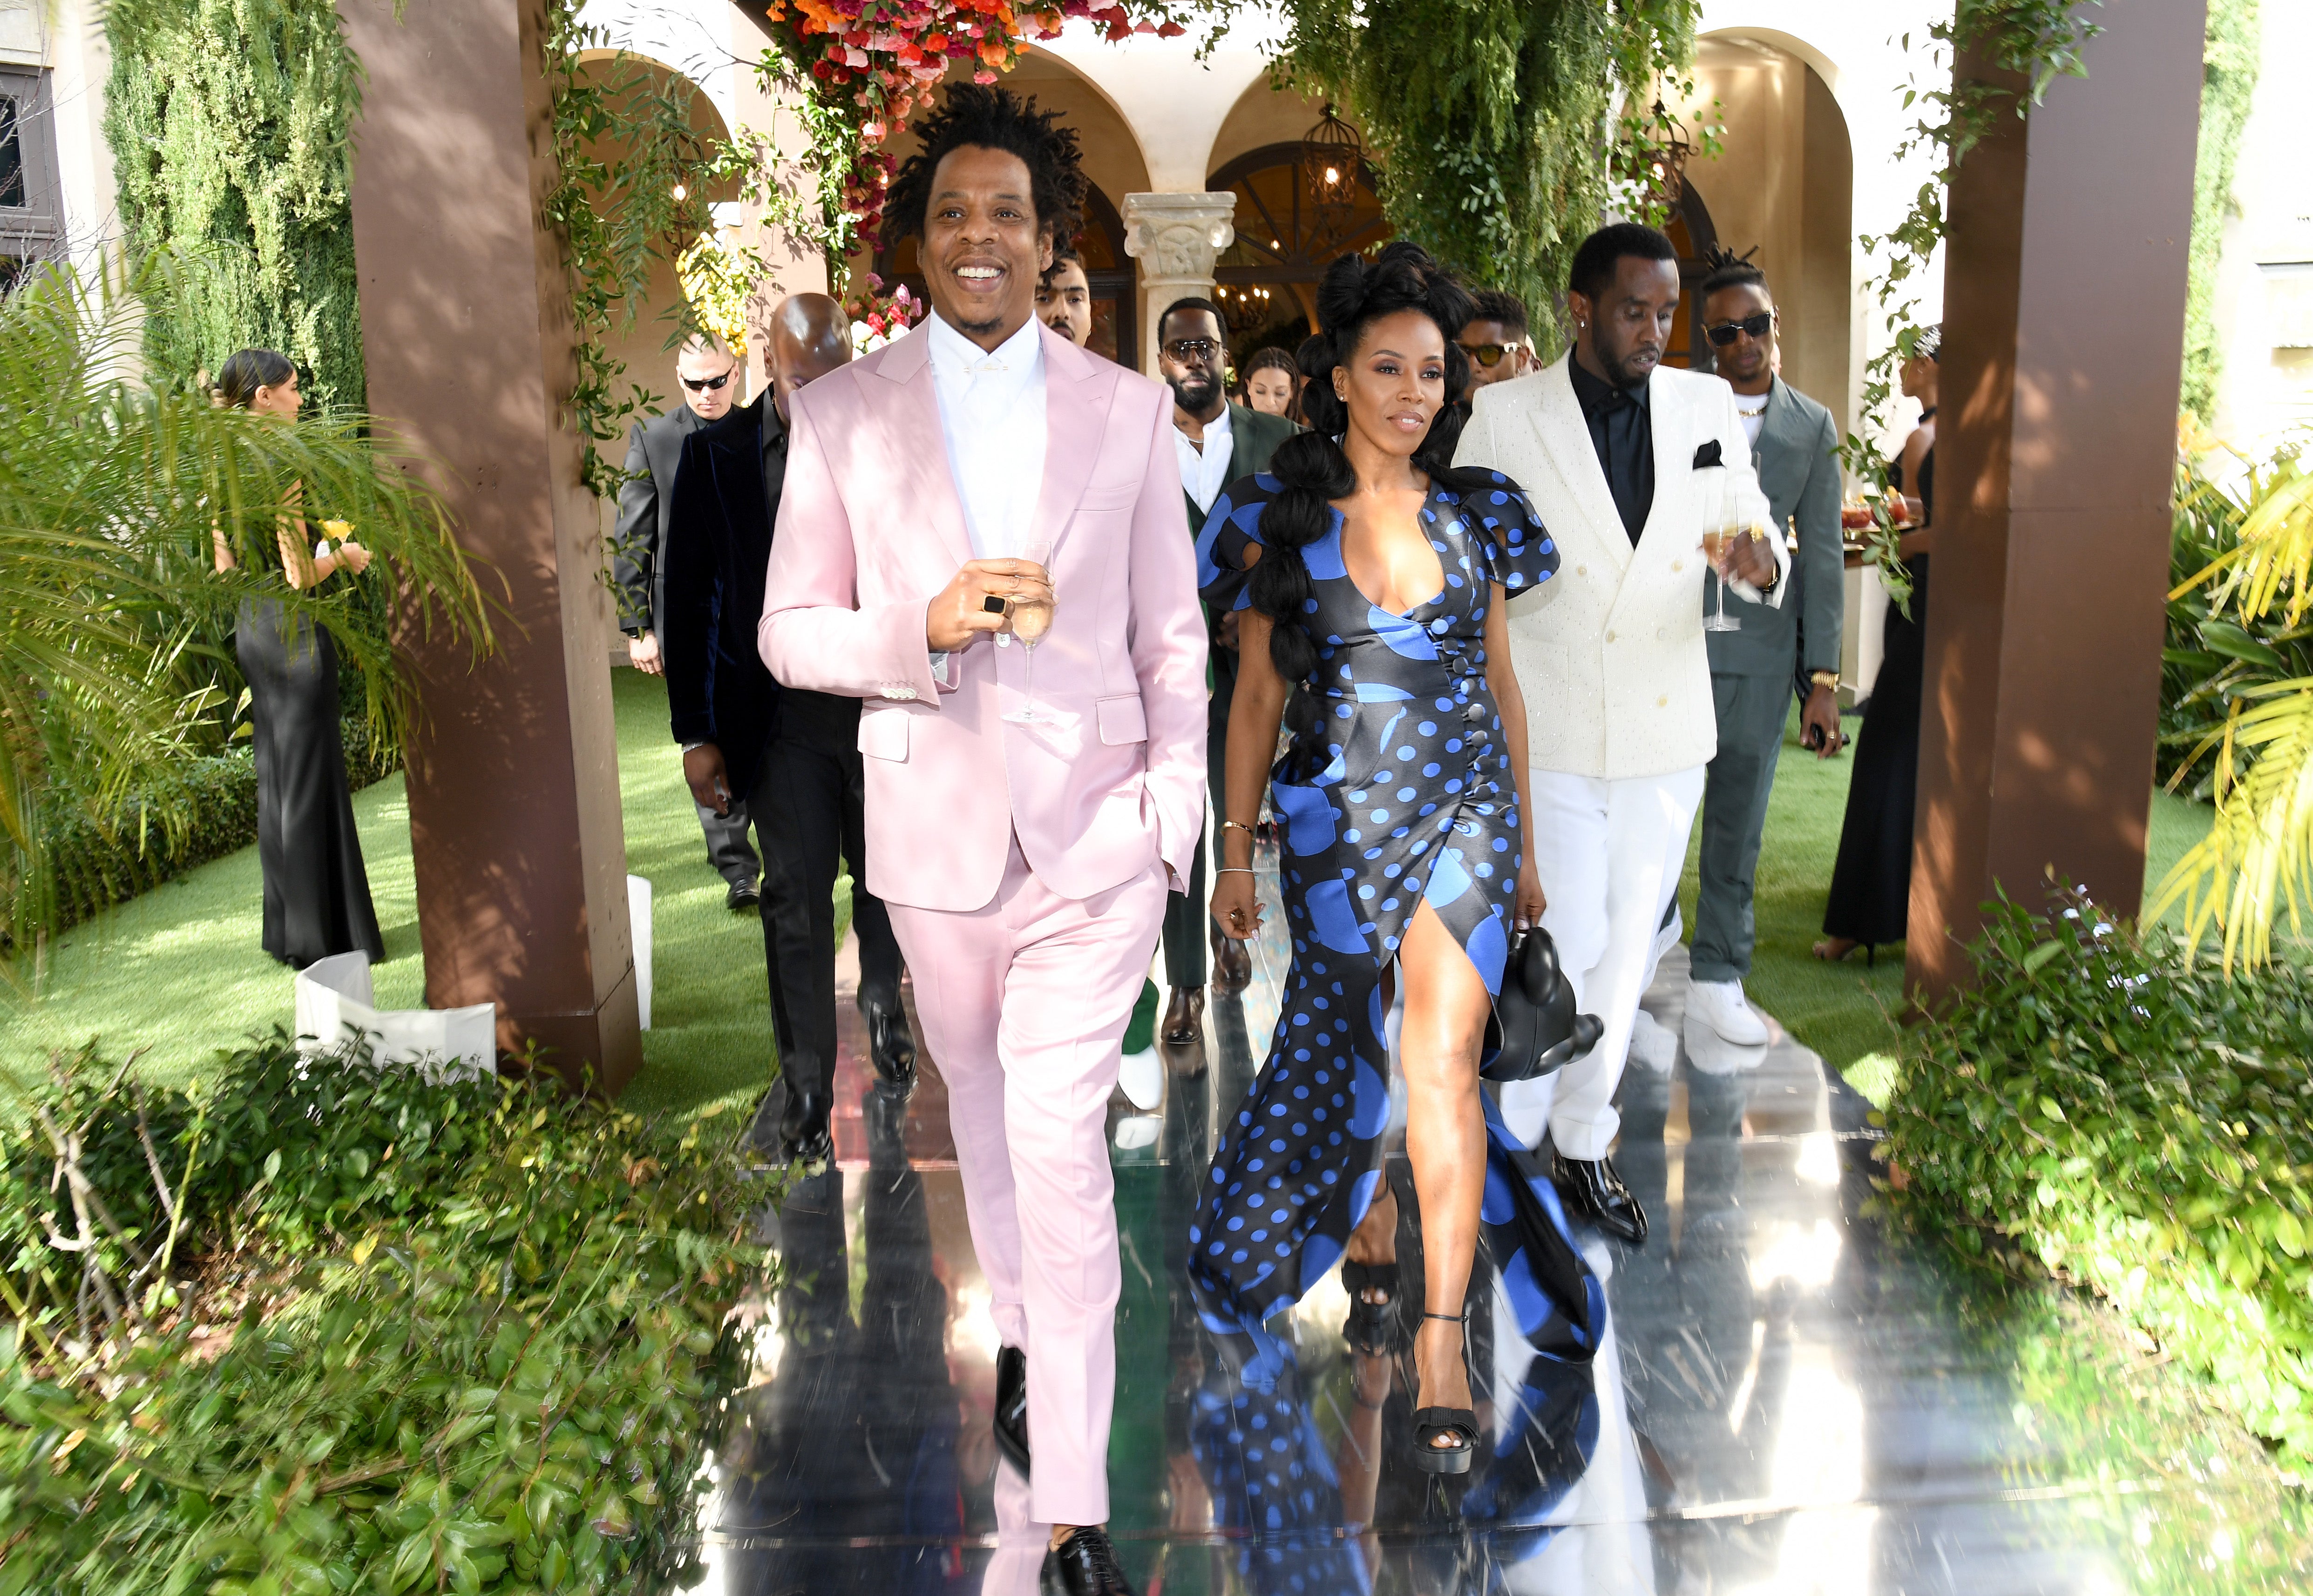 Here's Every Envy-Inducing Picture From The Roc Nation Brunch 2020